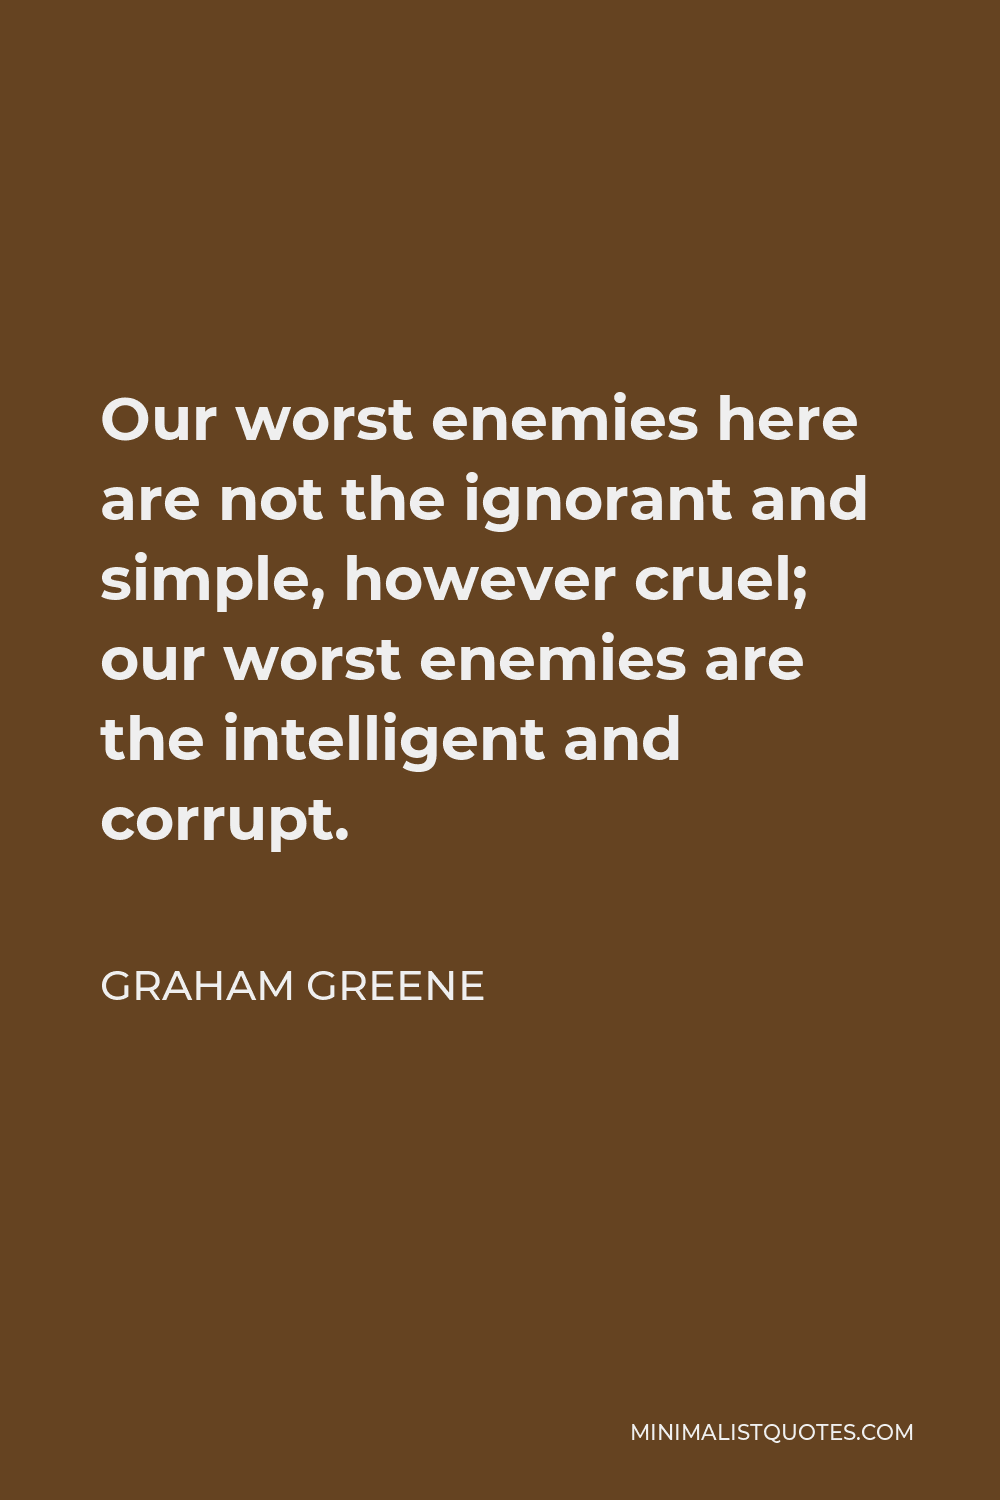 Graham Greene Quote - Our worst enemies here are not the ignorant and simple, however cruel; our worst enemies are the intelligent and corrupt.